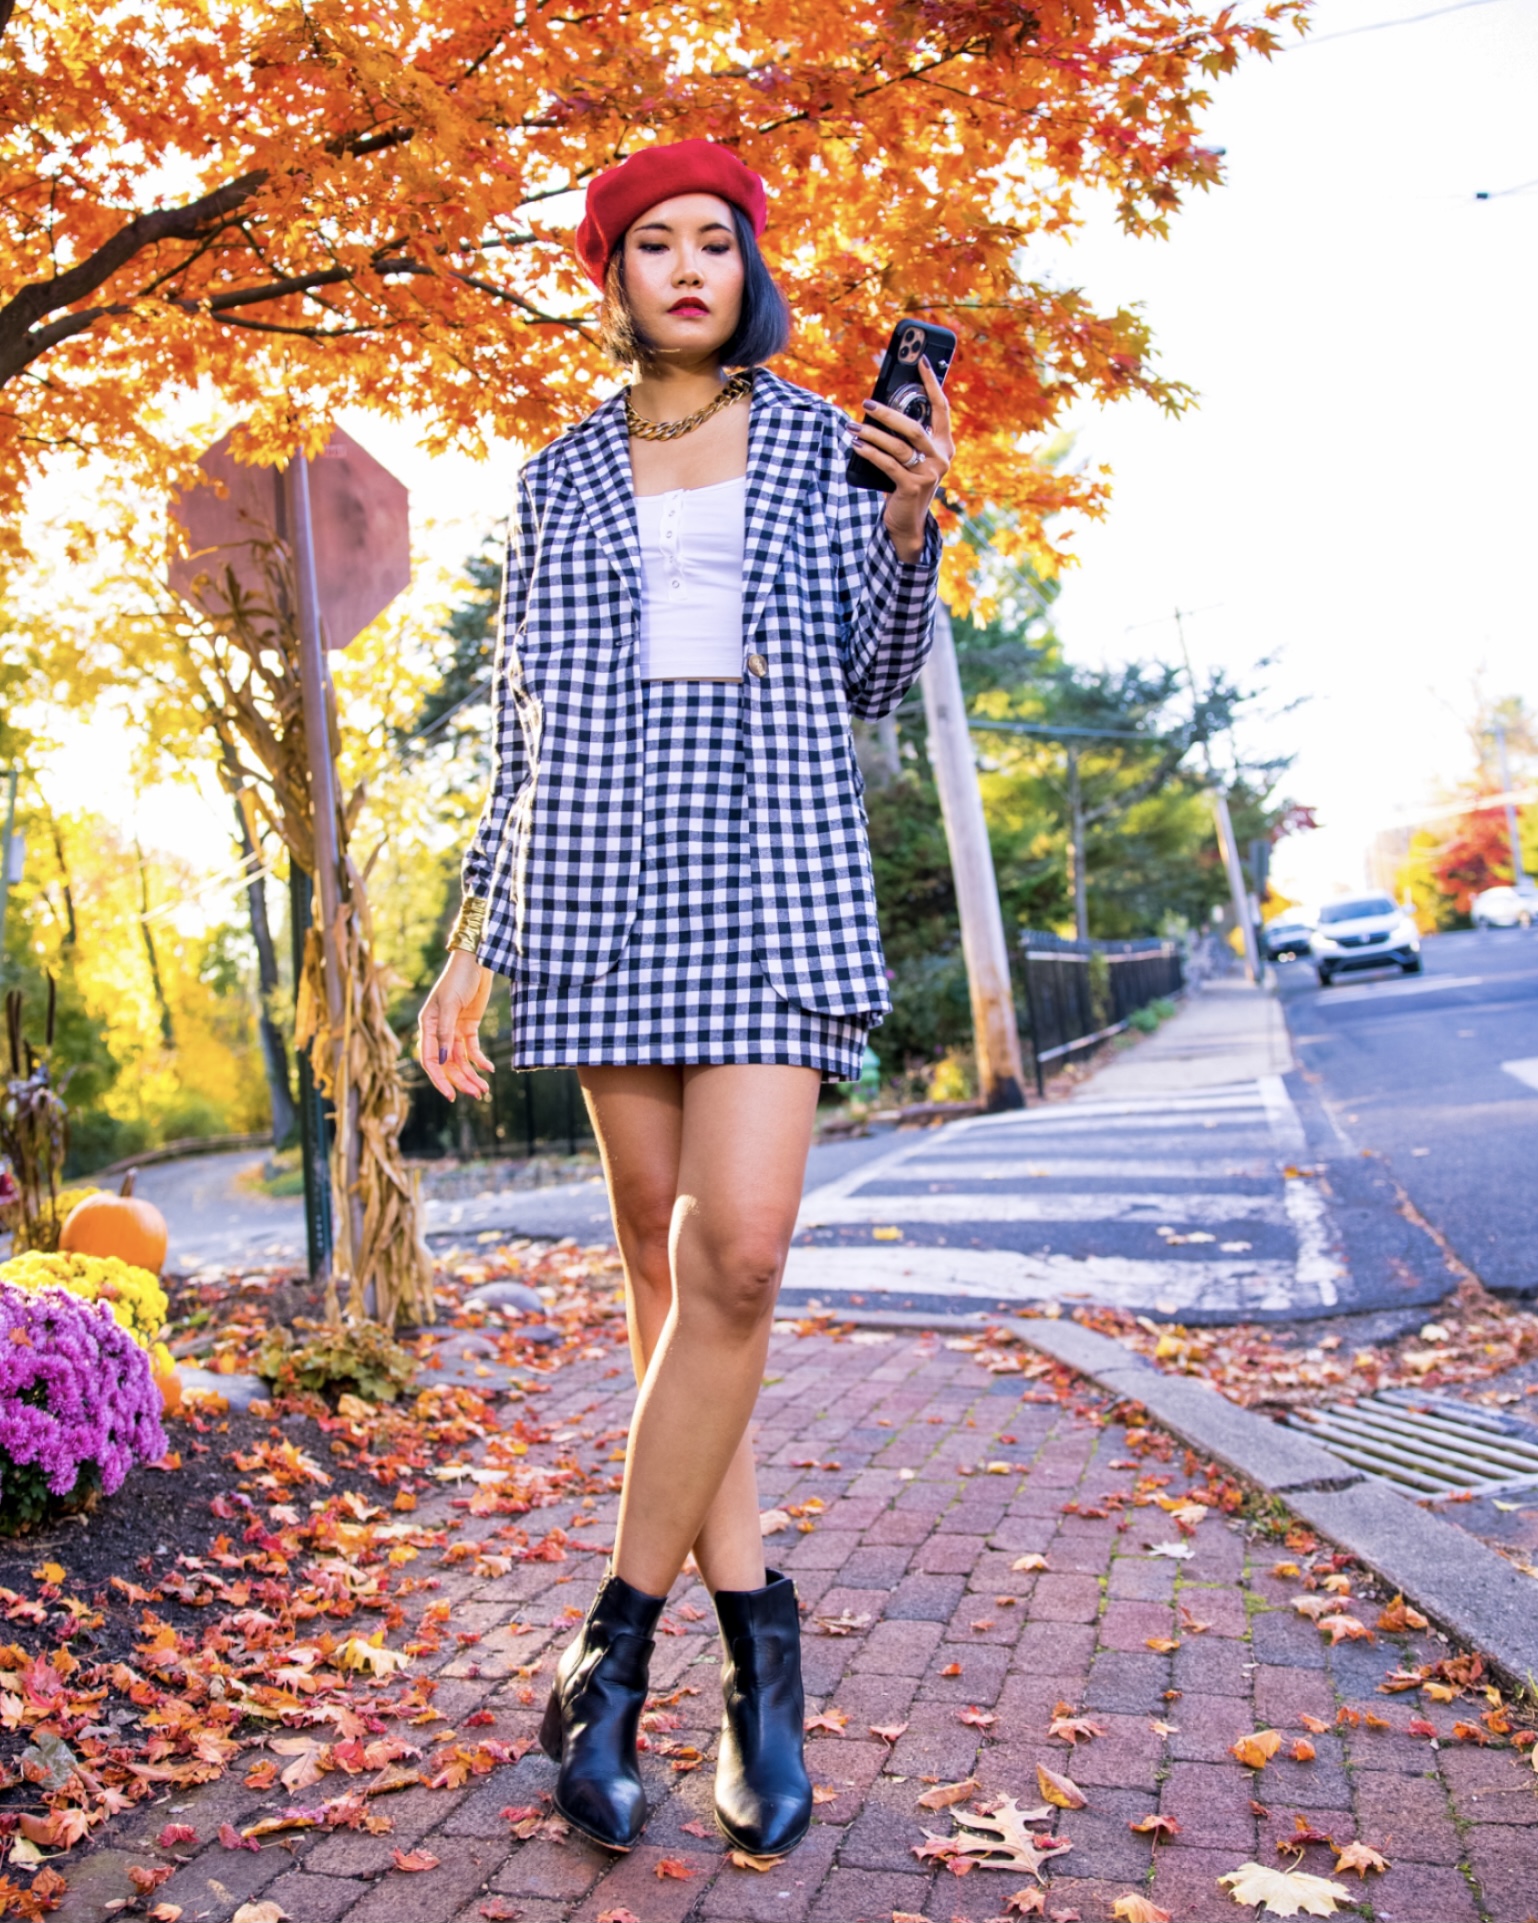 emily in paris inspired outfit by nanphanita jacob wearing checked blazer suit and red beret